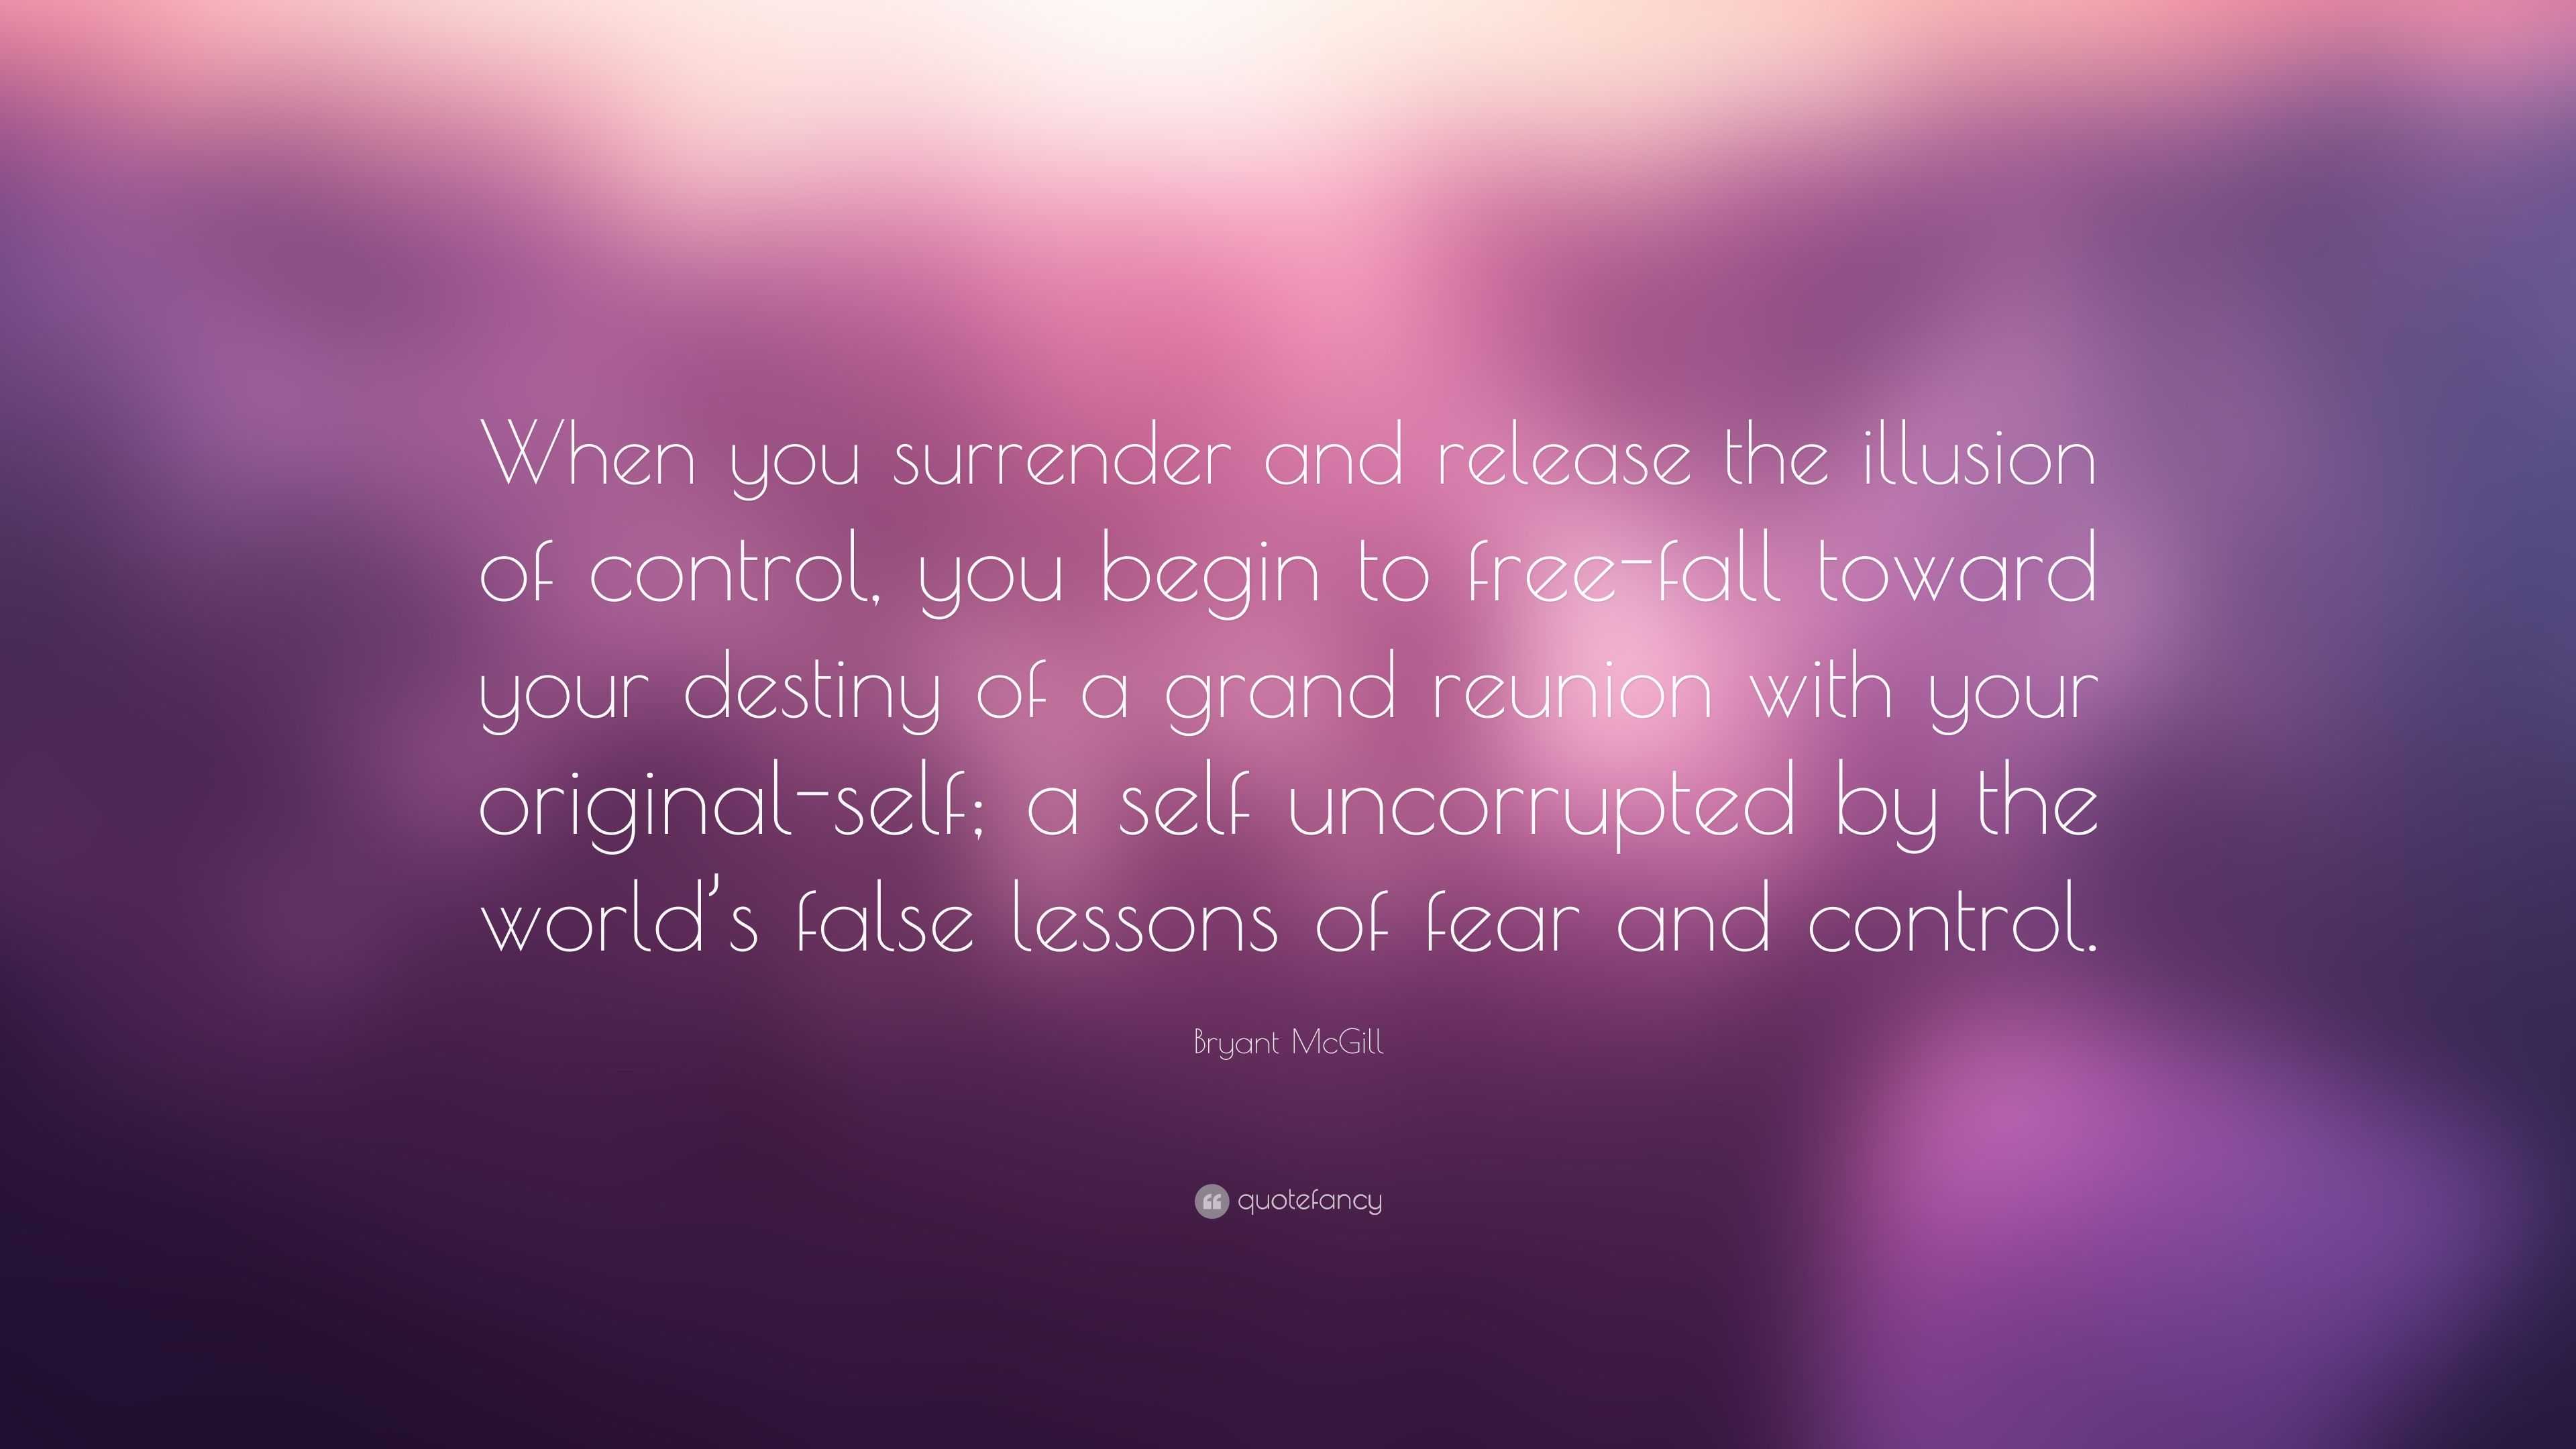 Bryant McGill Quote: “When you surrender and release the illusion of ...